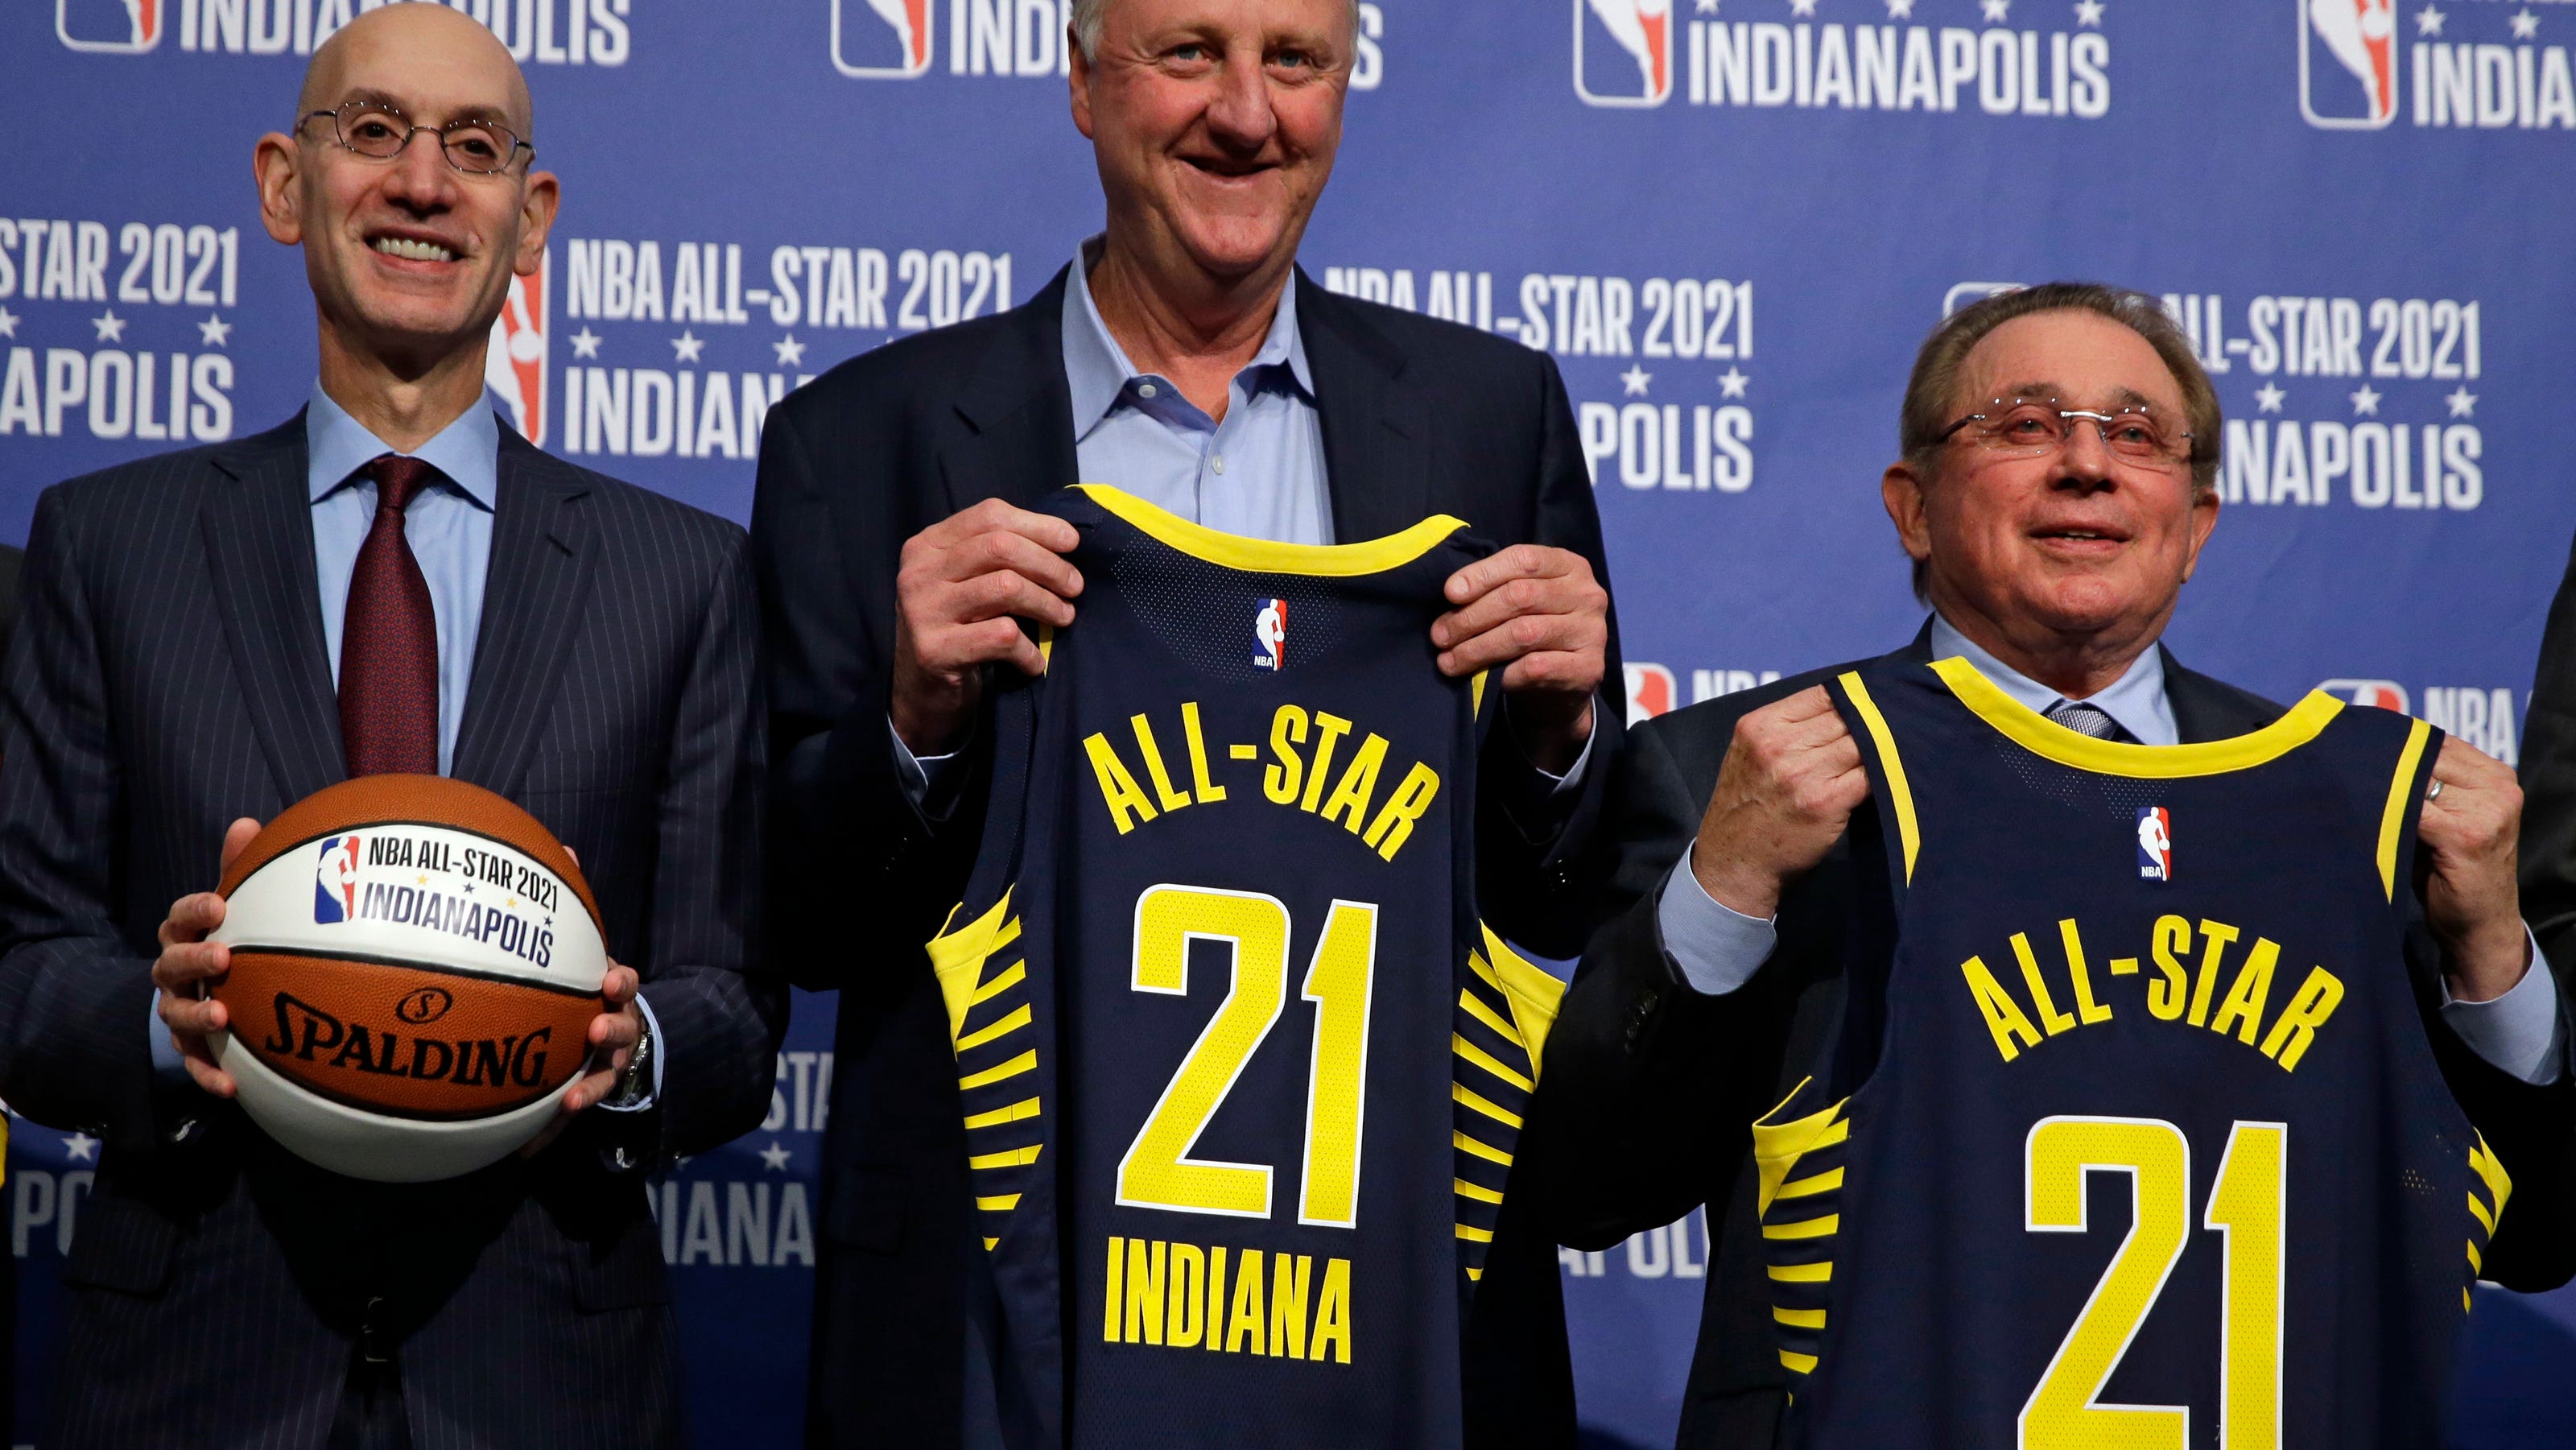 Nba Selects Indianapolis To Host 2021 All Star Game